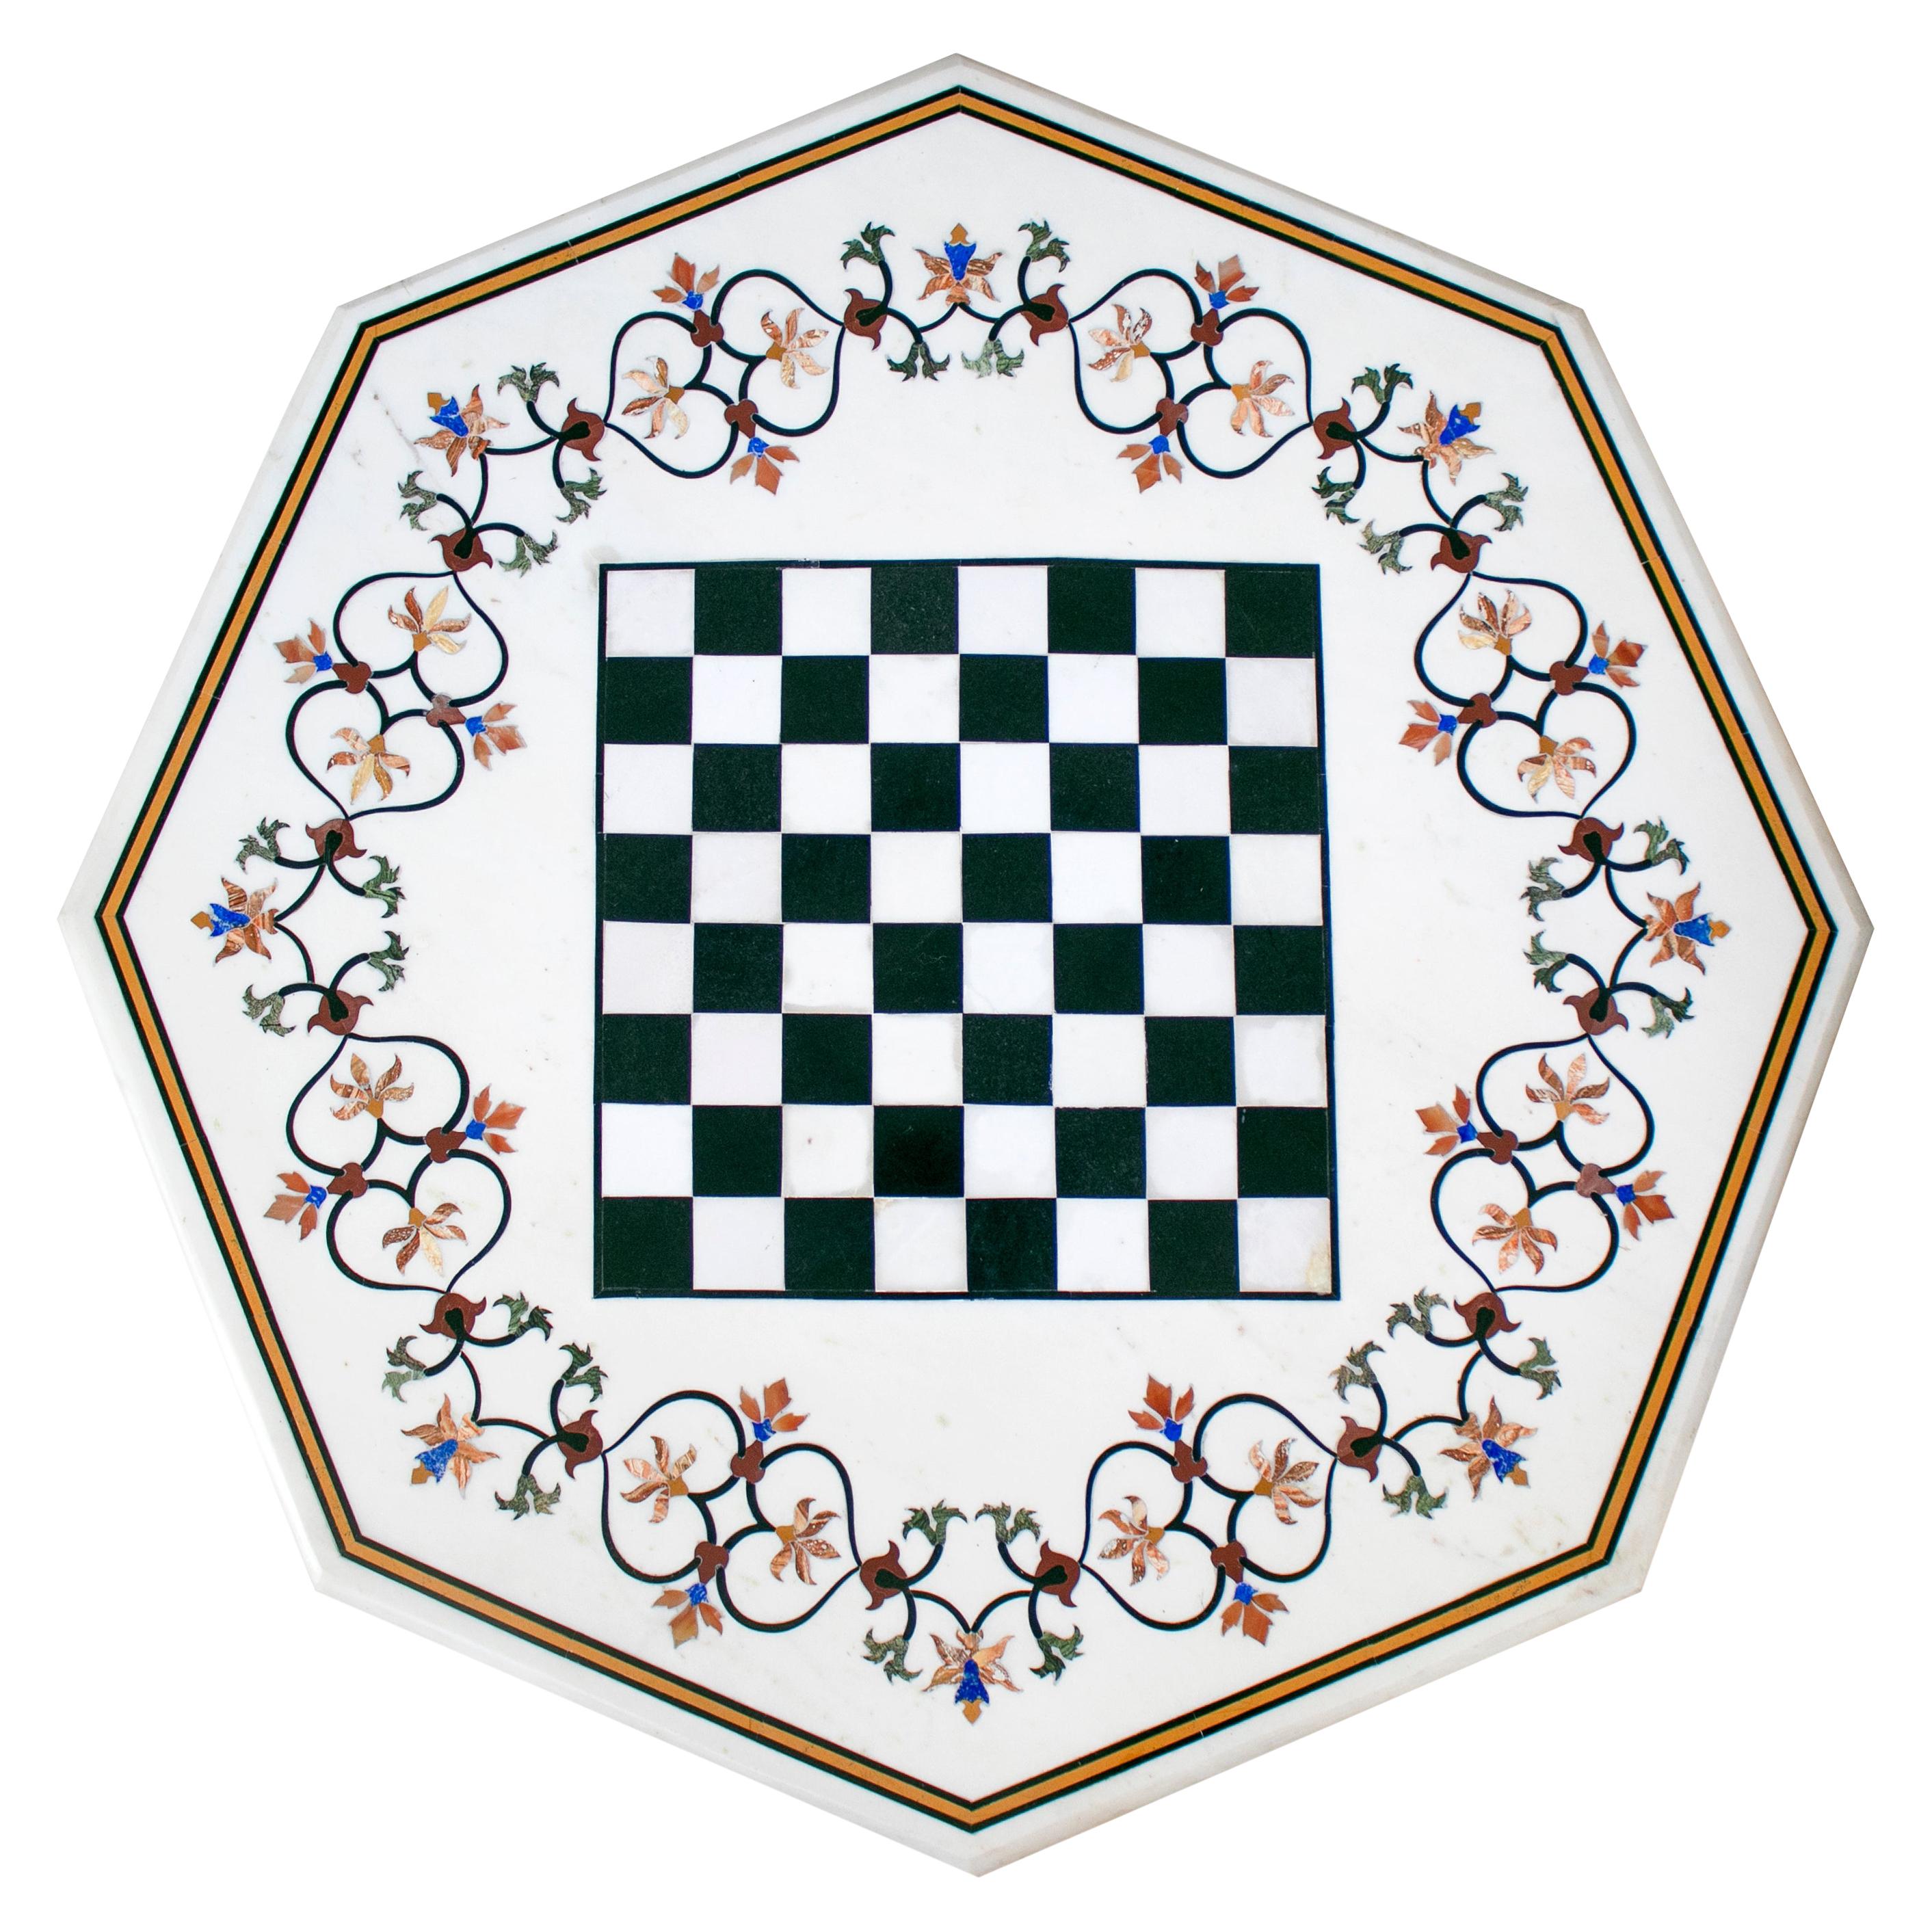 Octagonal Pietre Dure Marble Inlay Mosaic Chess Table Top with Lapis and Jade For Sale